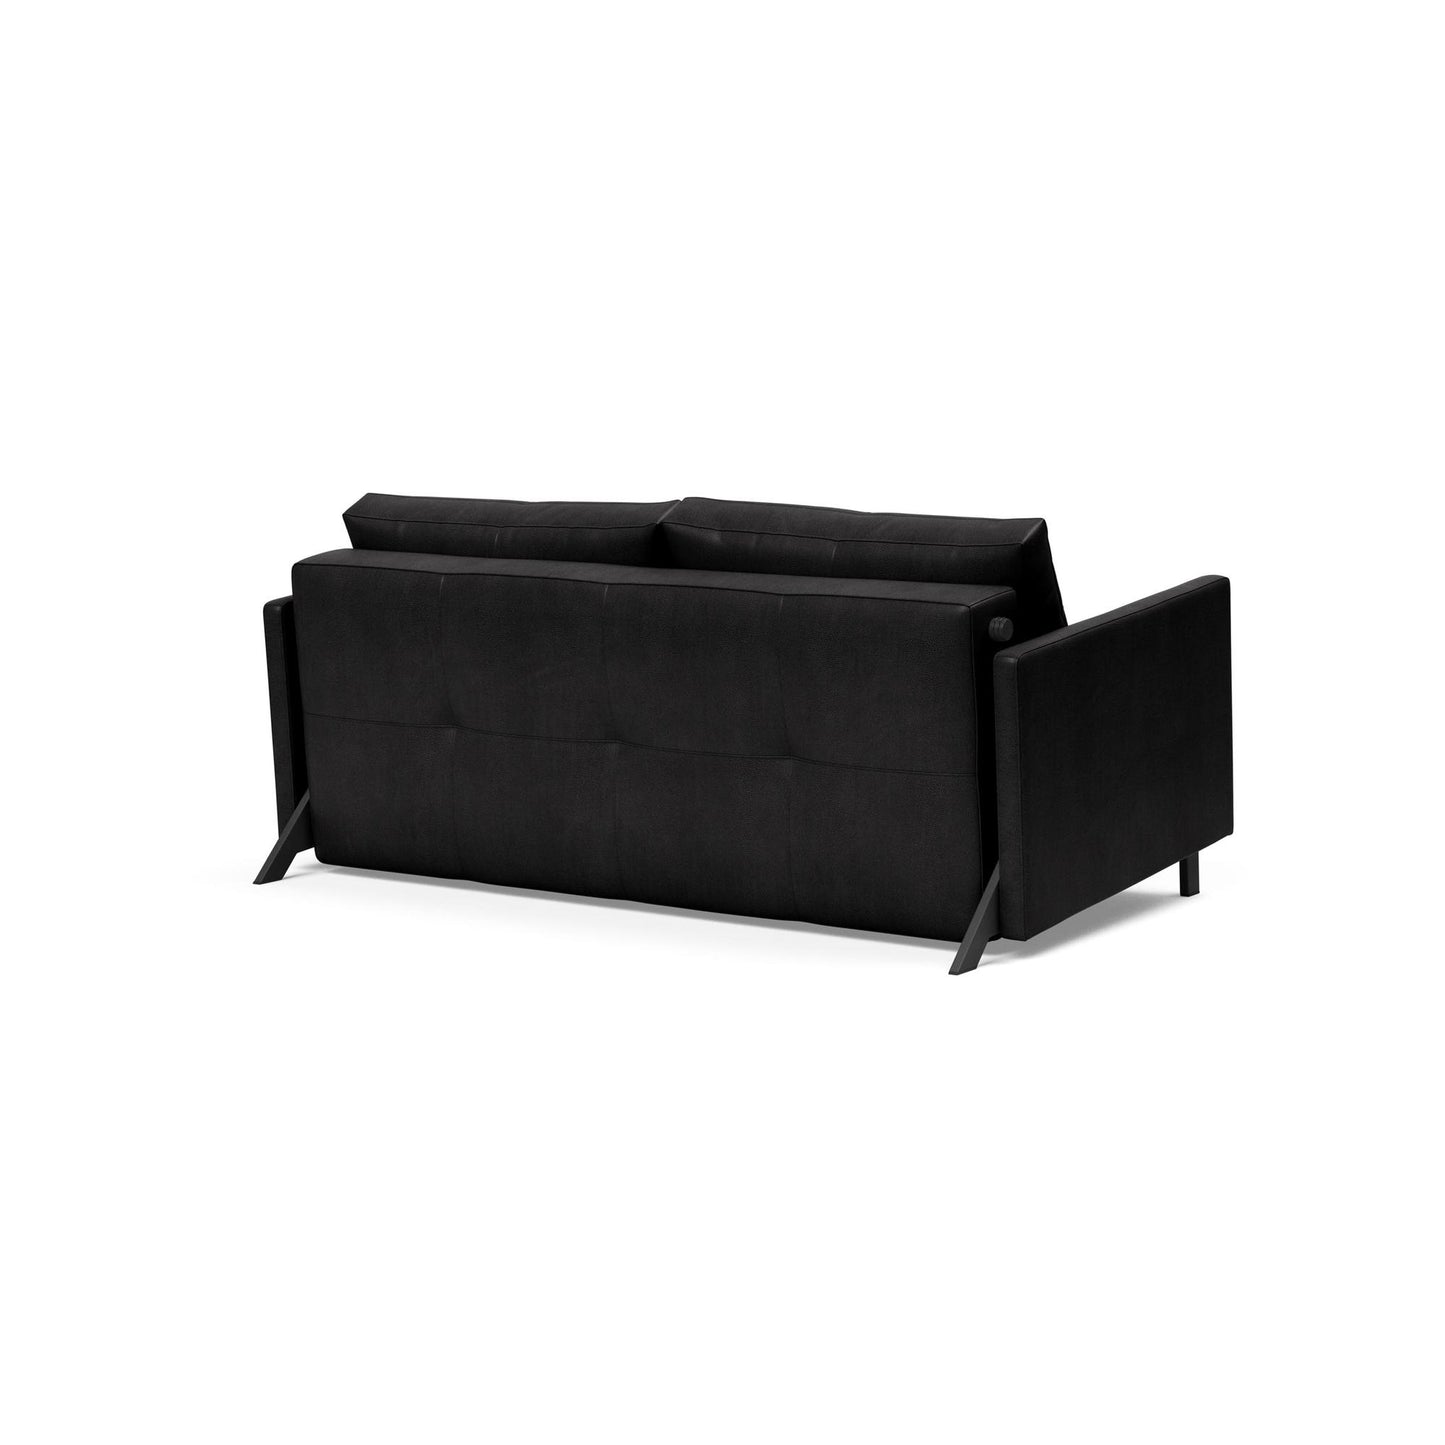 Cubed Deluxe Queen Sofa Bed w/Arms in Fanual Black